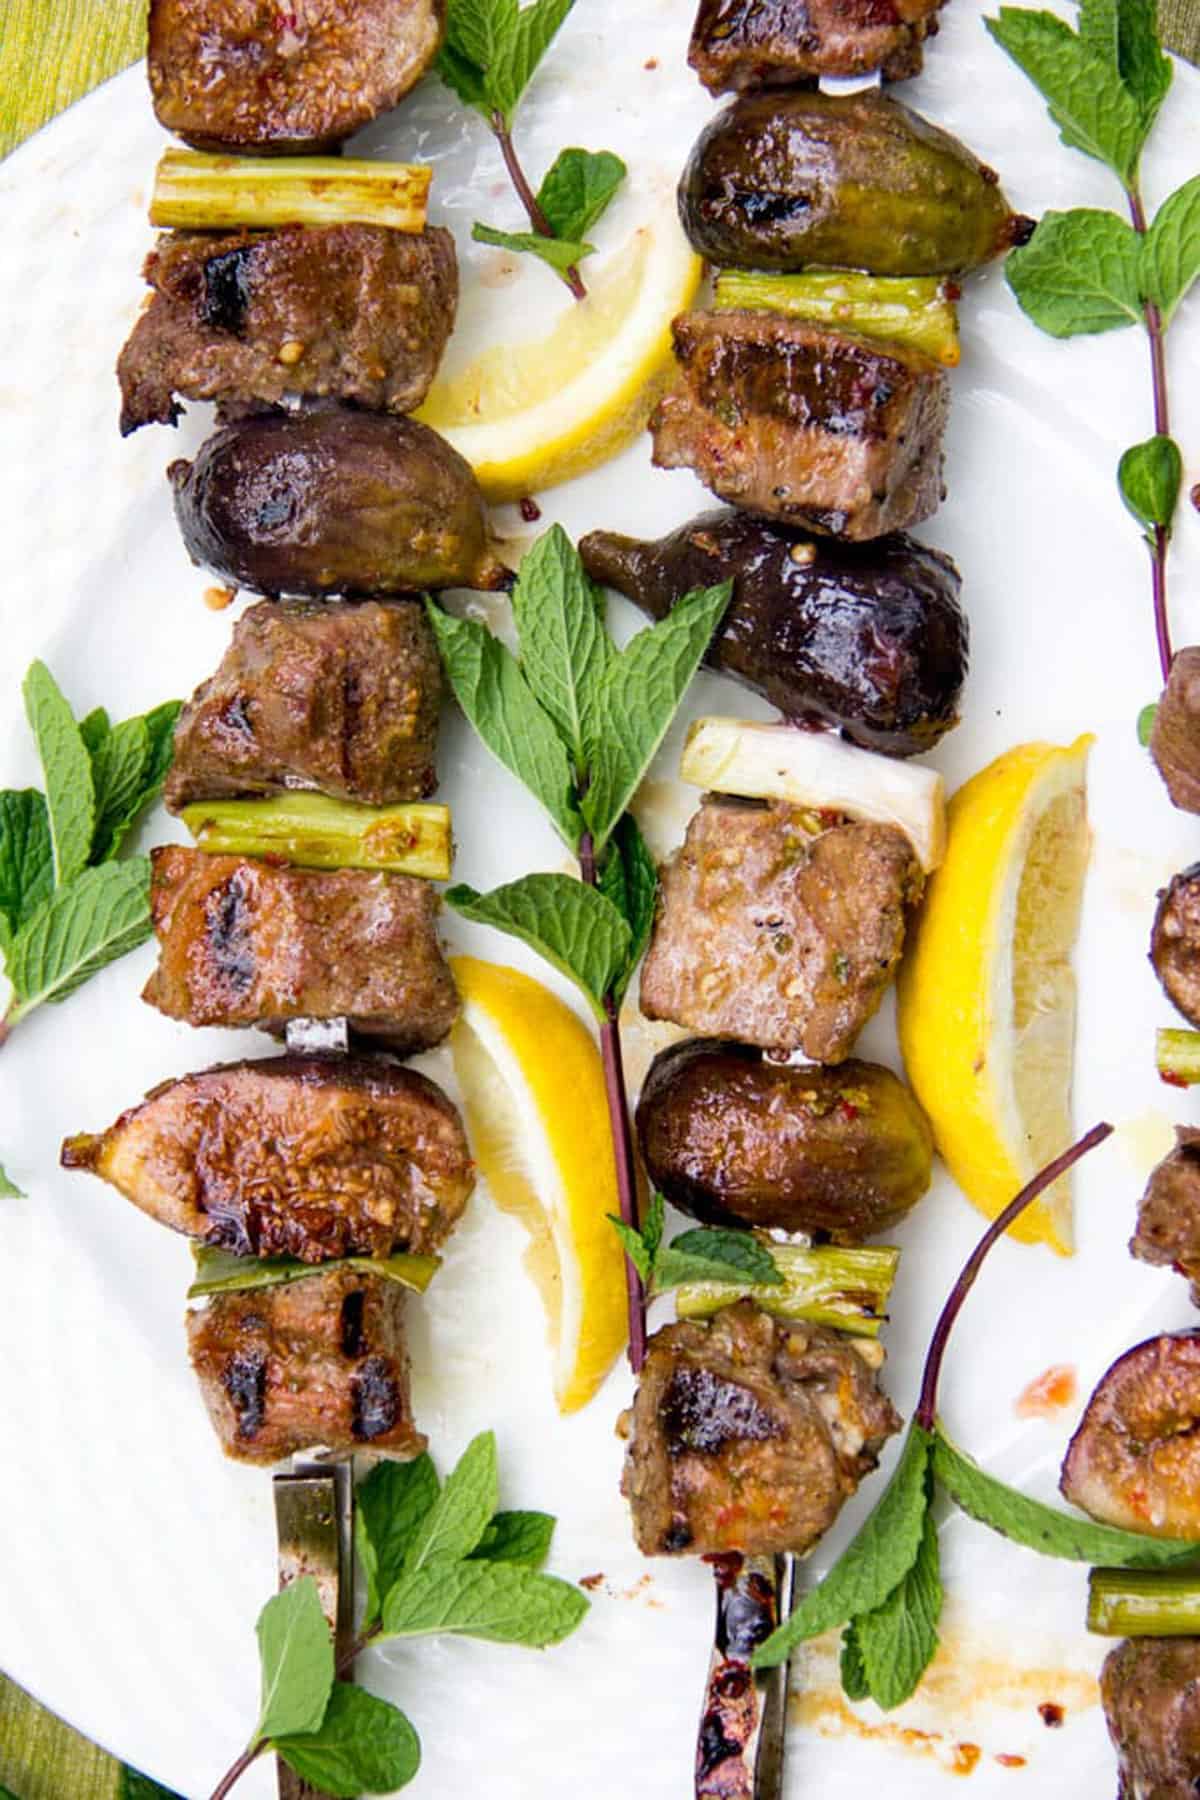 Two kebabs threaded with cubes of lamb, halved fresh figs and pieces of scallions, surrounded by lemon slices and mint sprigs